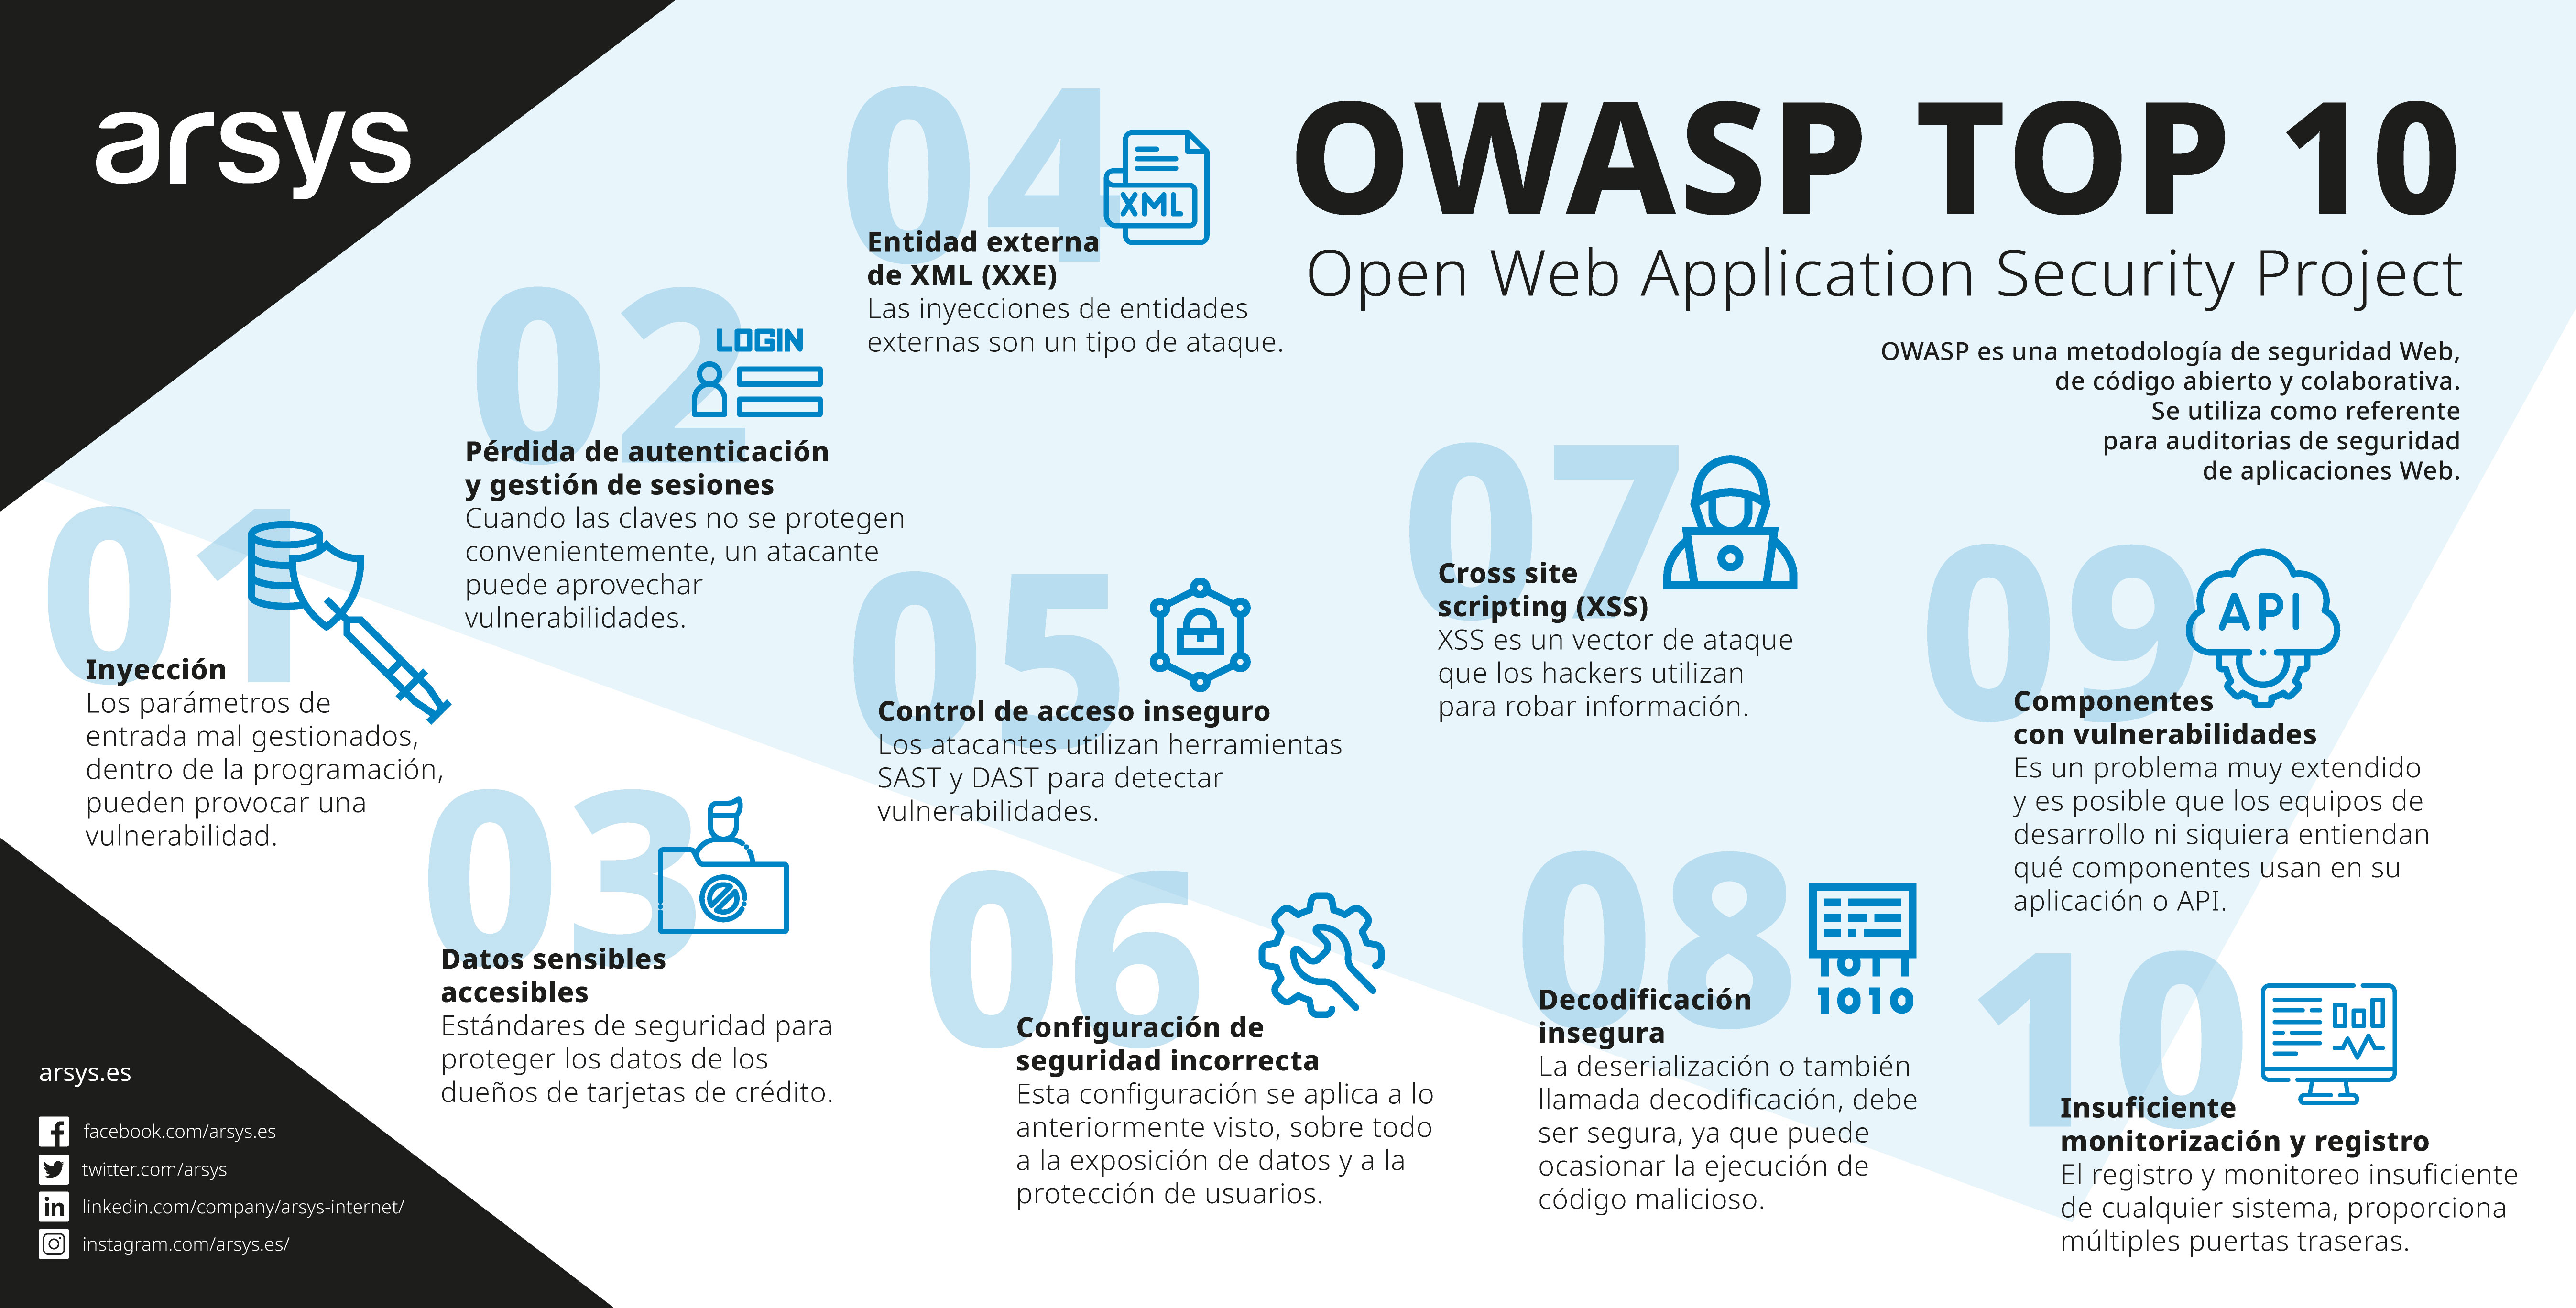 OWASP (Open Web Application Security Project) top 10